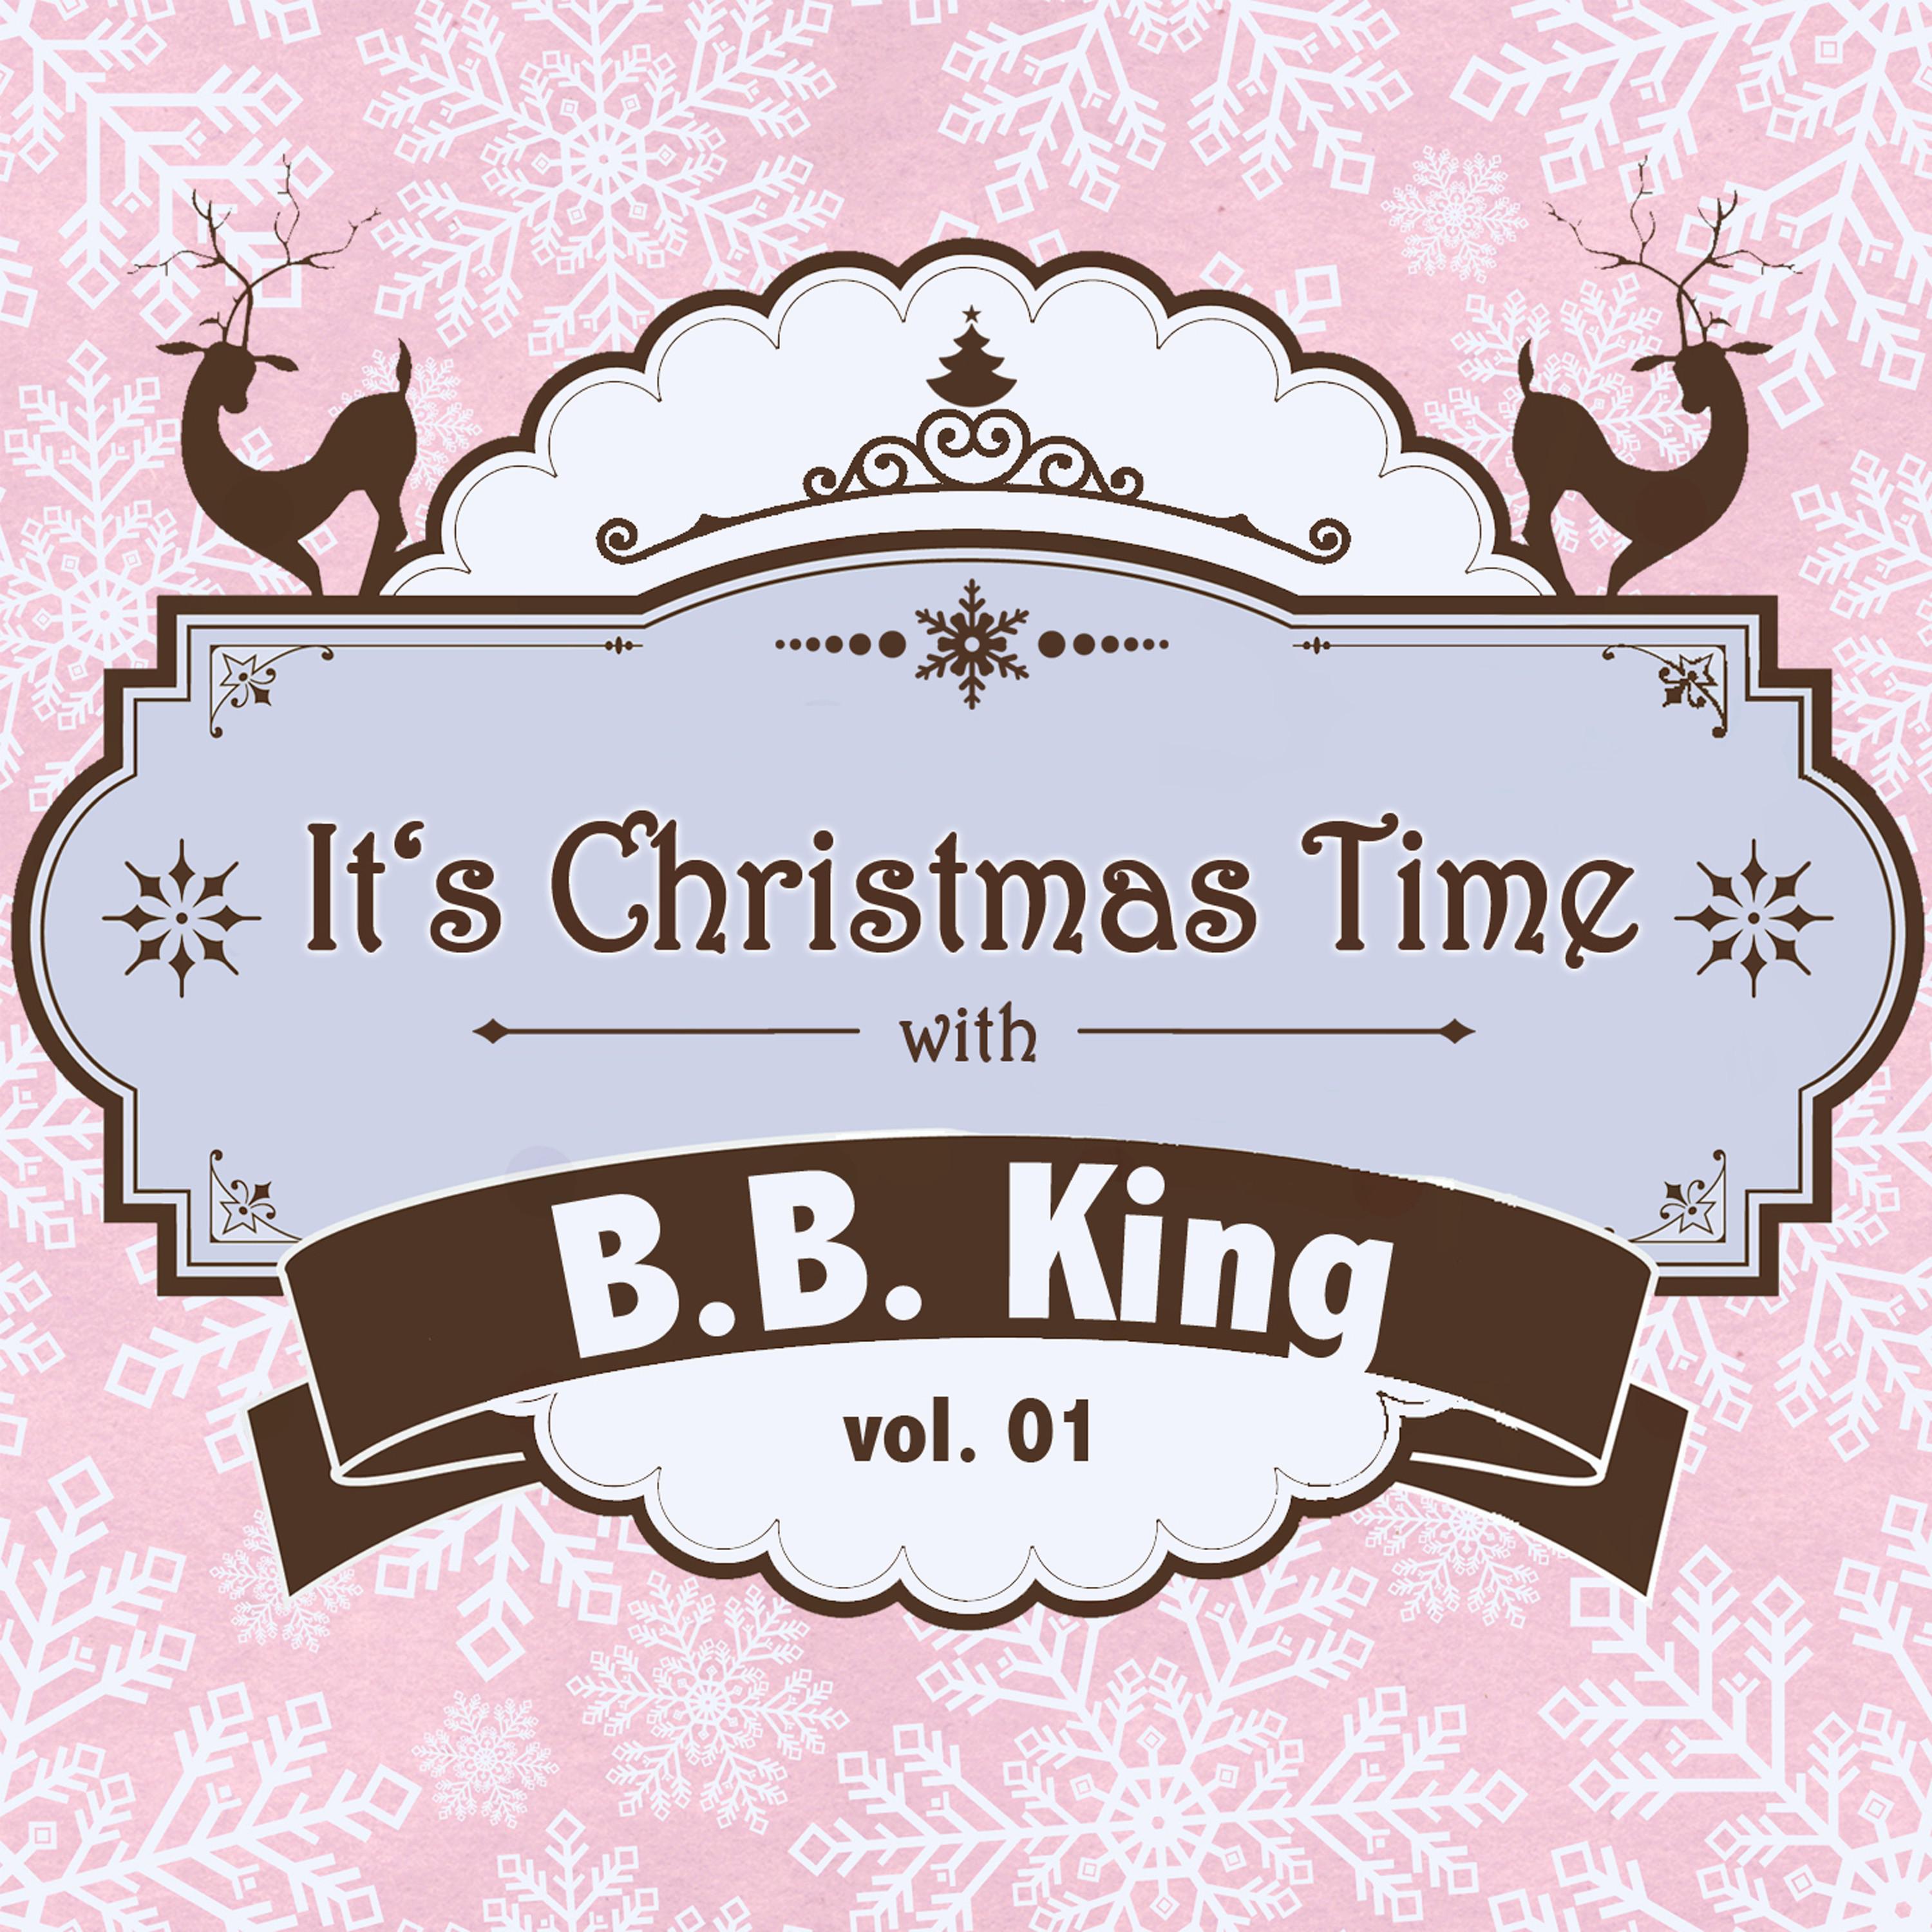 It's Christmas Time with B.B. King Vol. 01